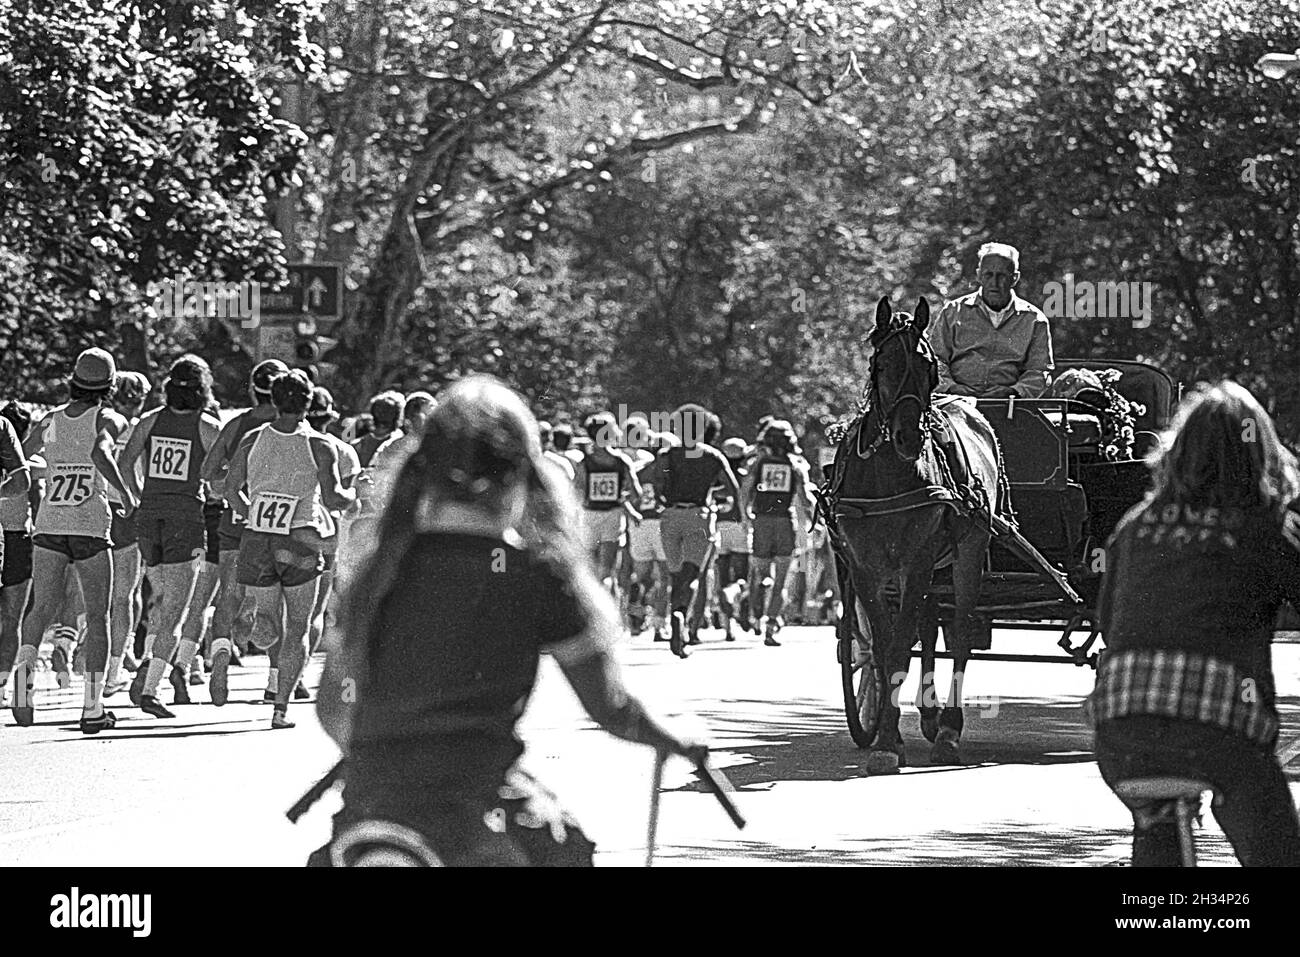 Horse-drawn carriage and runners competing in  the 1973 New York City Marathon. Stock Photo